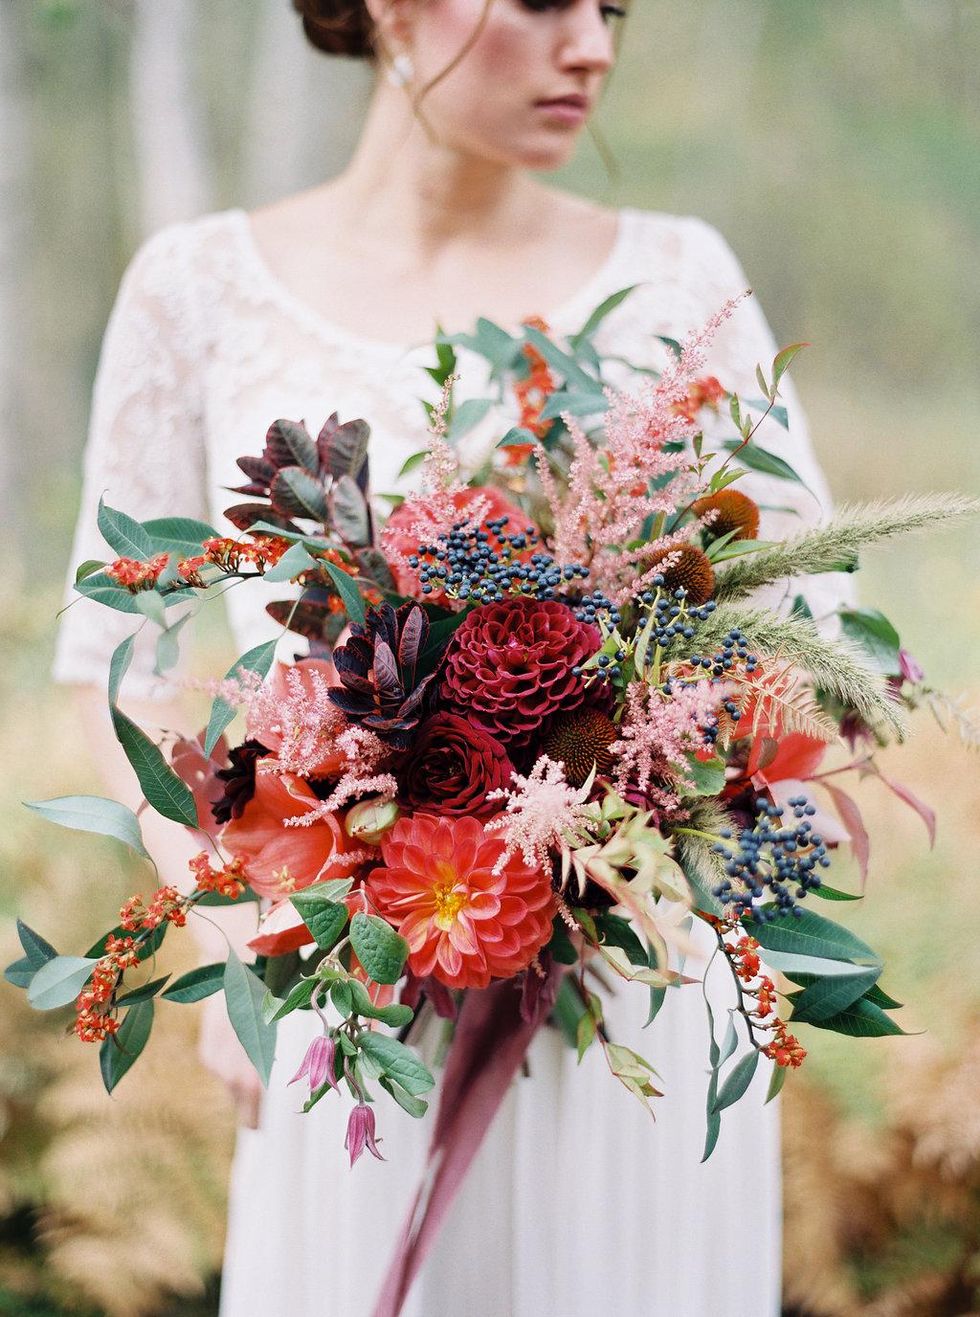 43 Fall Wedding Bouquets - Fall Flowers for Wedding Bouquets